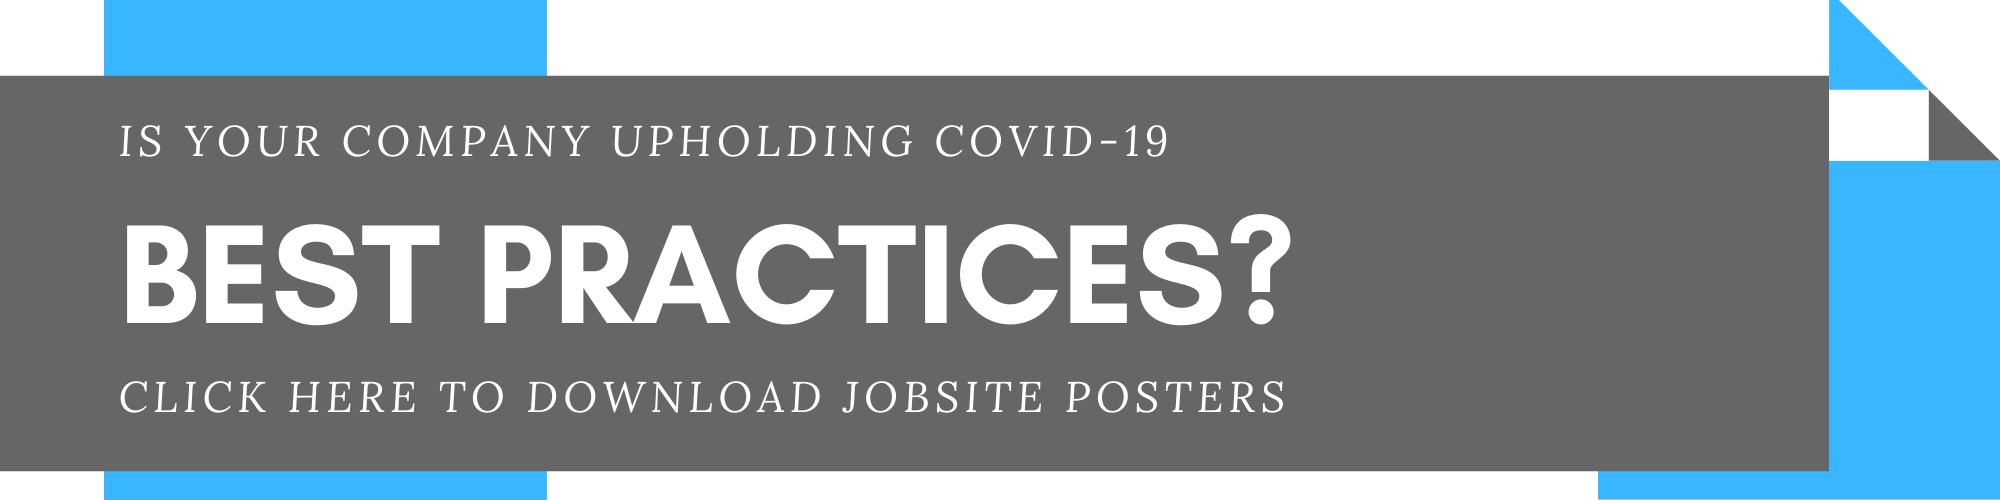 IS YOUR JOB SITE UPHOLDING COVID-19